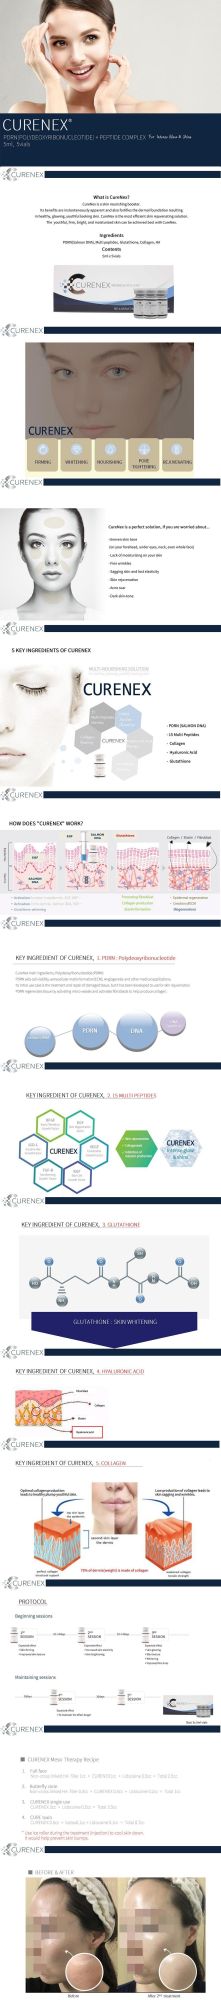 Korea′ S New Curenex Skin Booster Curenex Can Inject Pdrn Skin Tenderizer for Whitening Skin Fillers